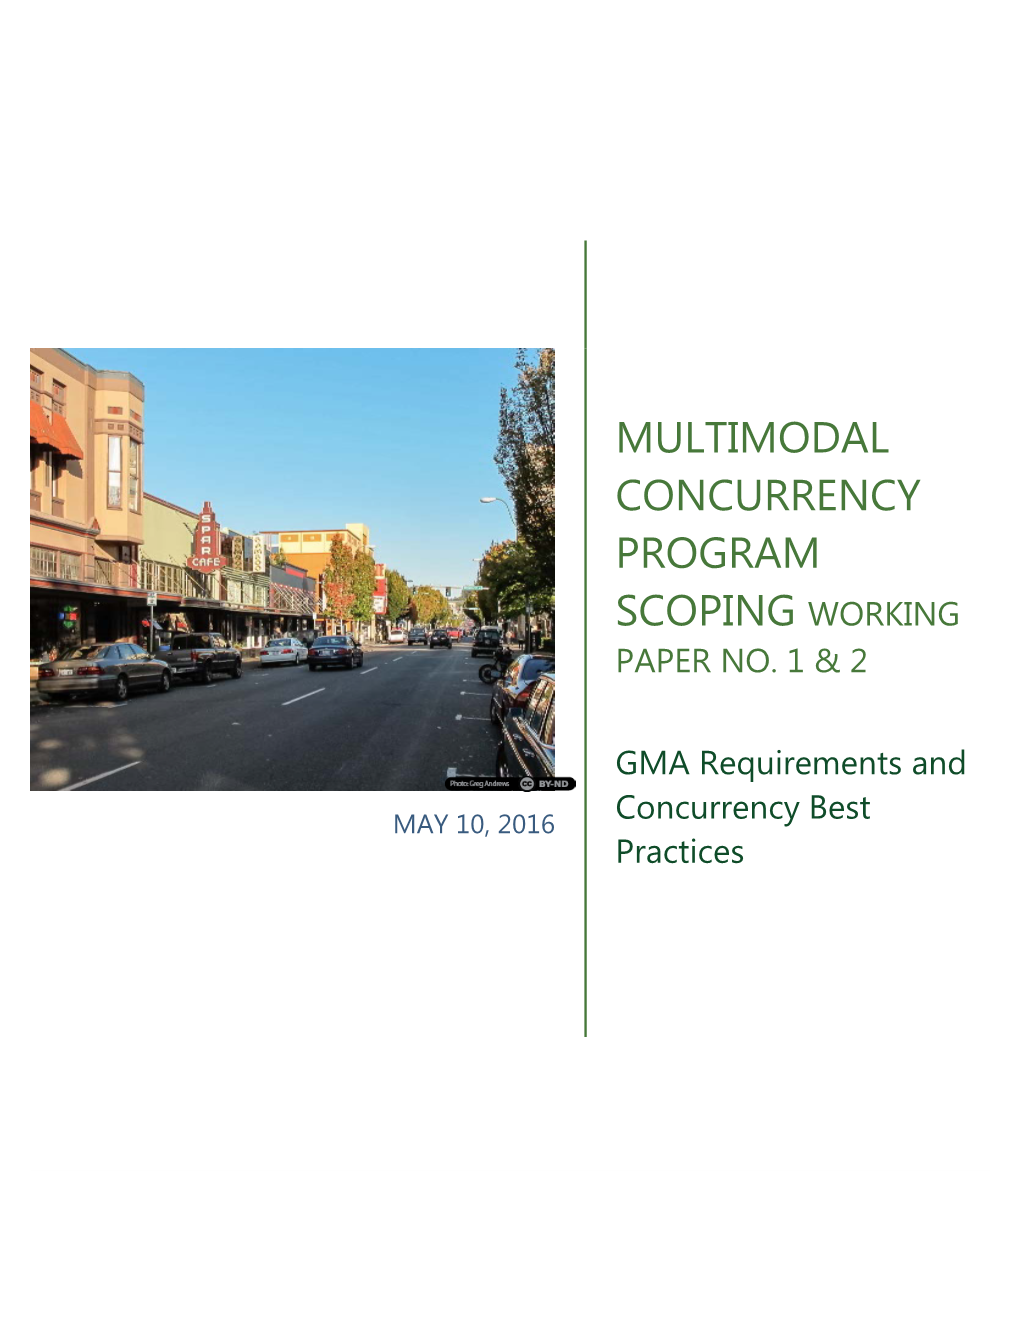 Multimodal Concurrency Program Scoping Working Paper No